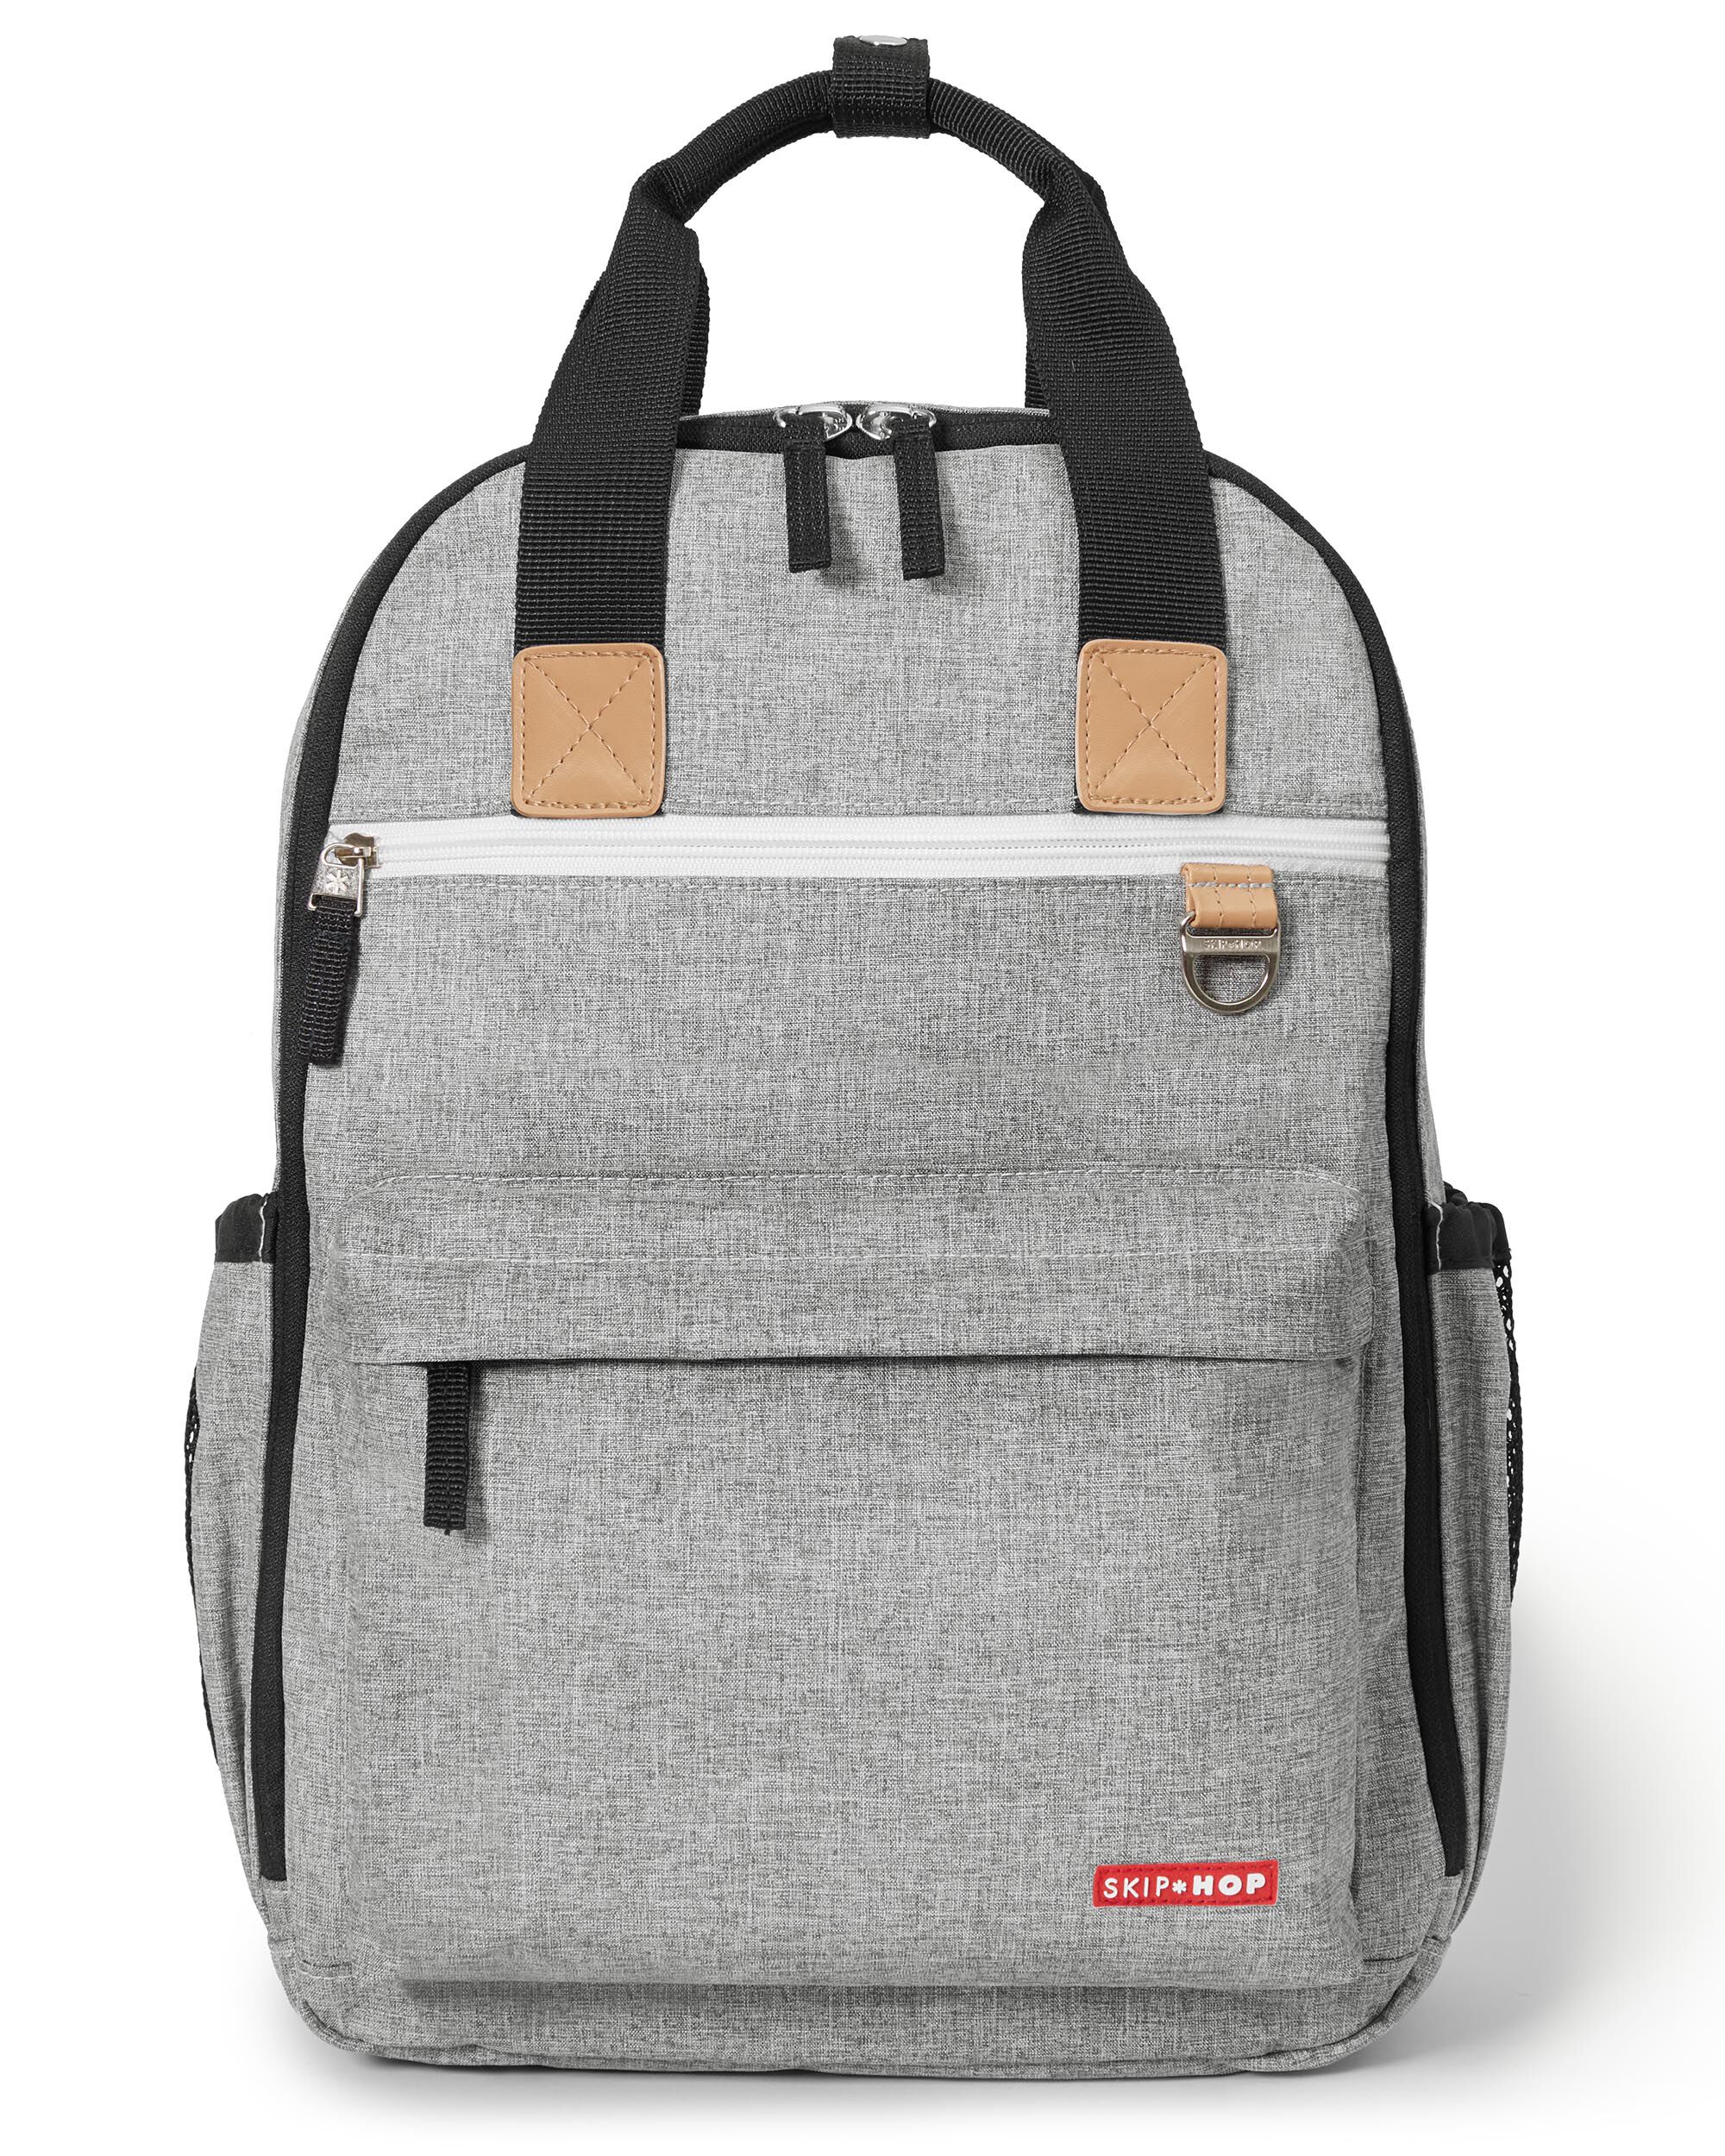 Duo Backpack | skiphop.com